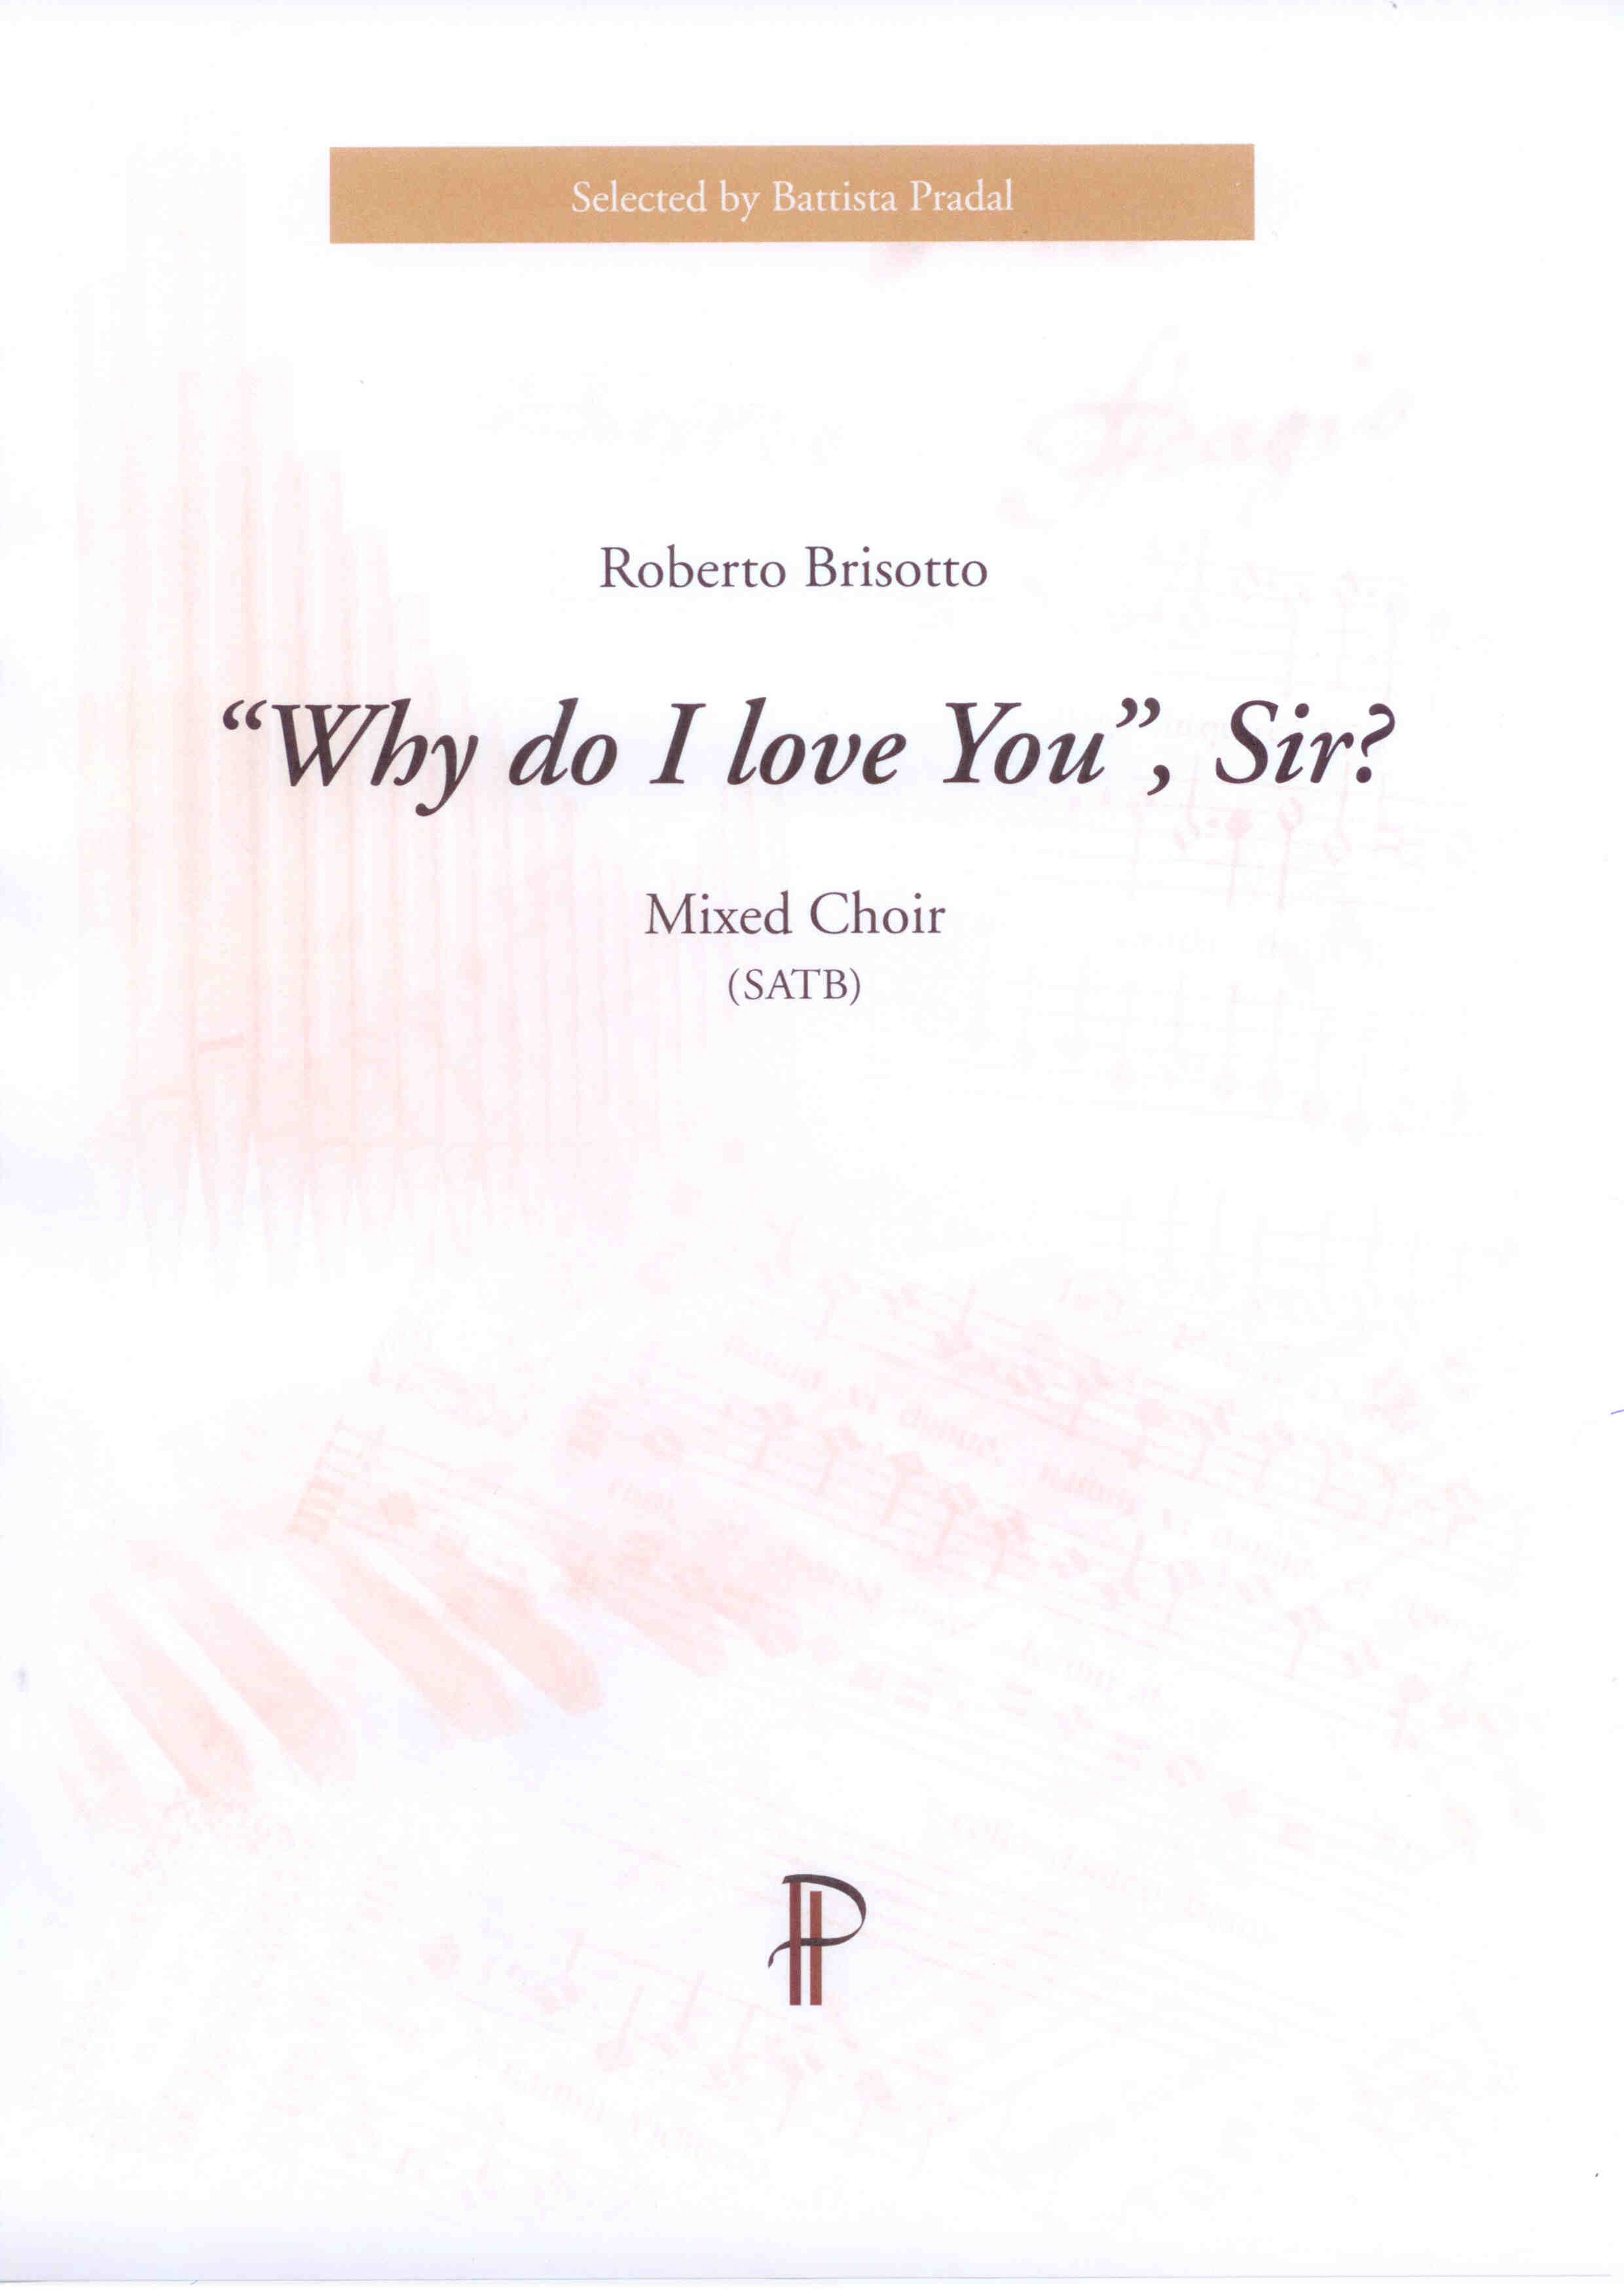 Why do I love You,Sir? - Show sample score